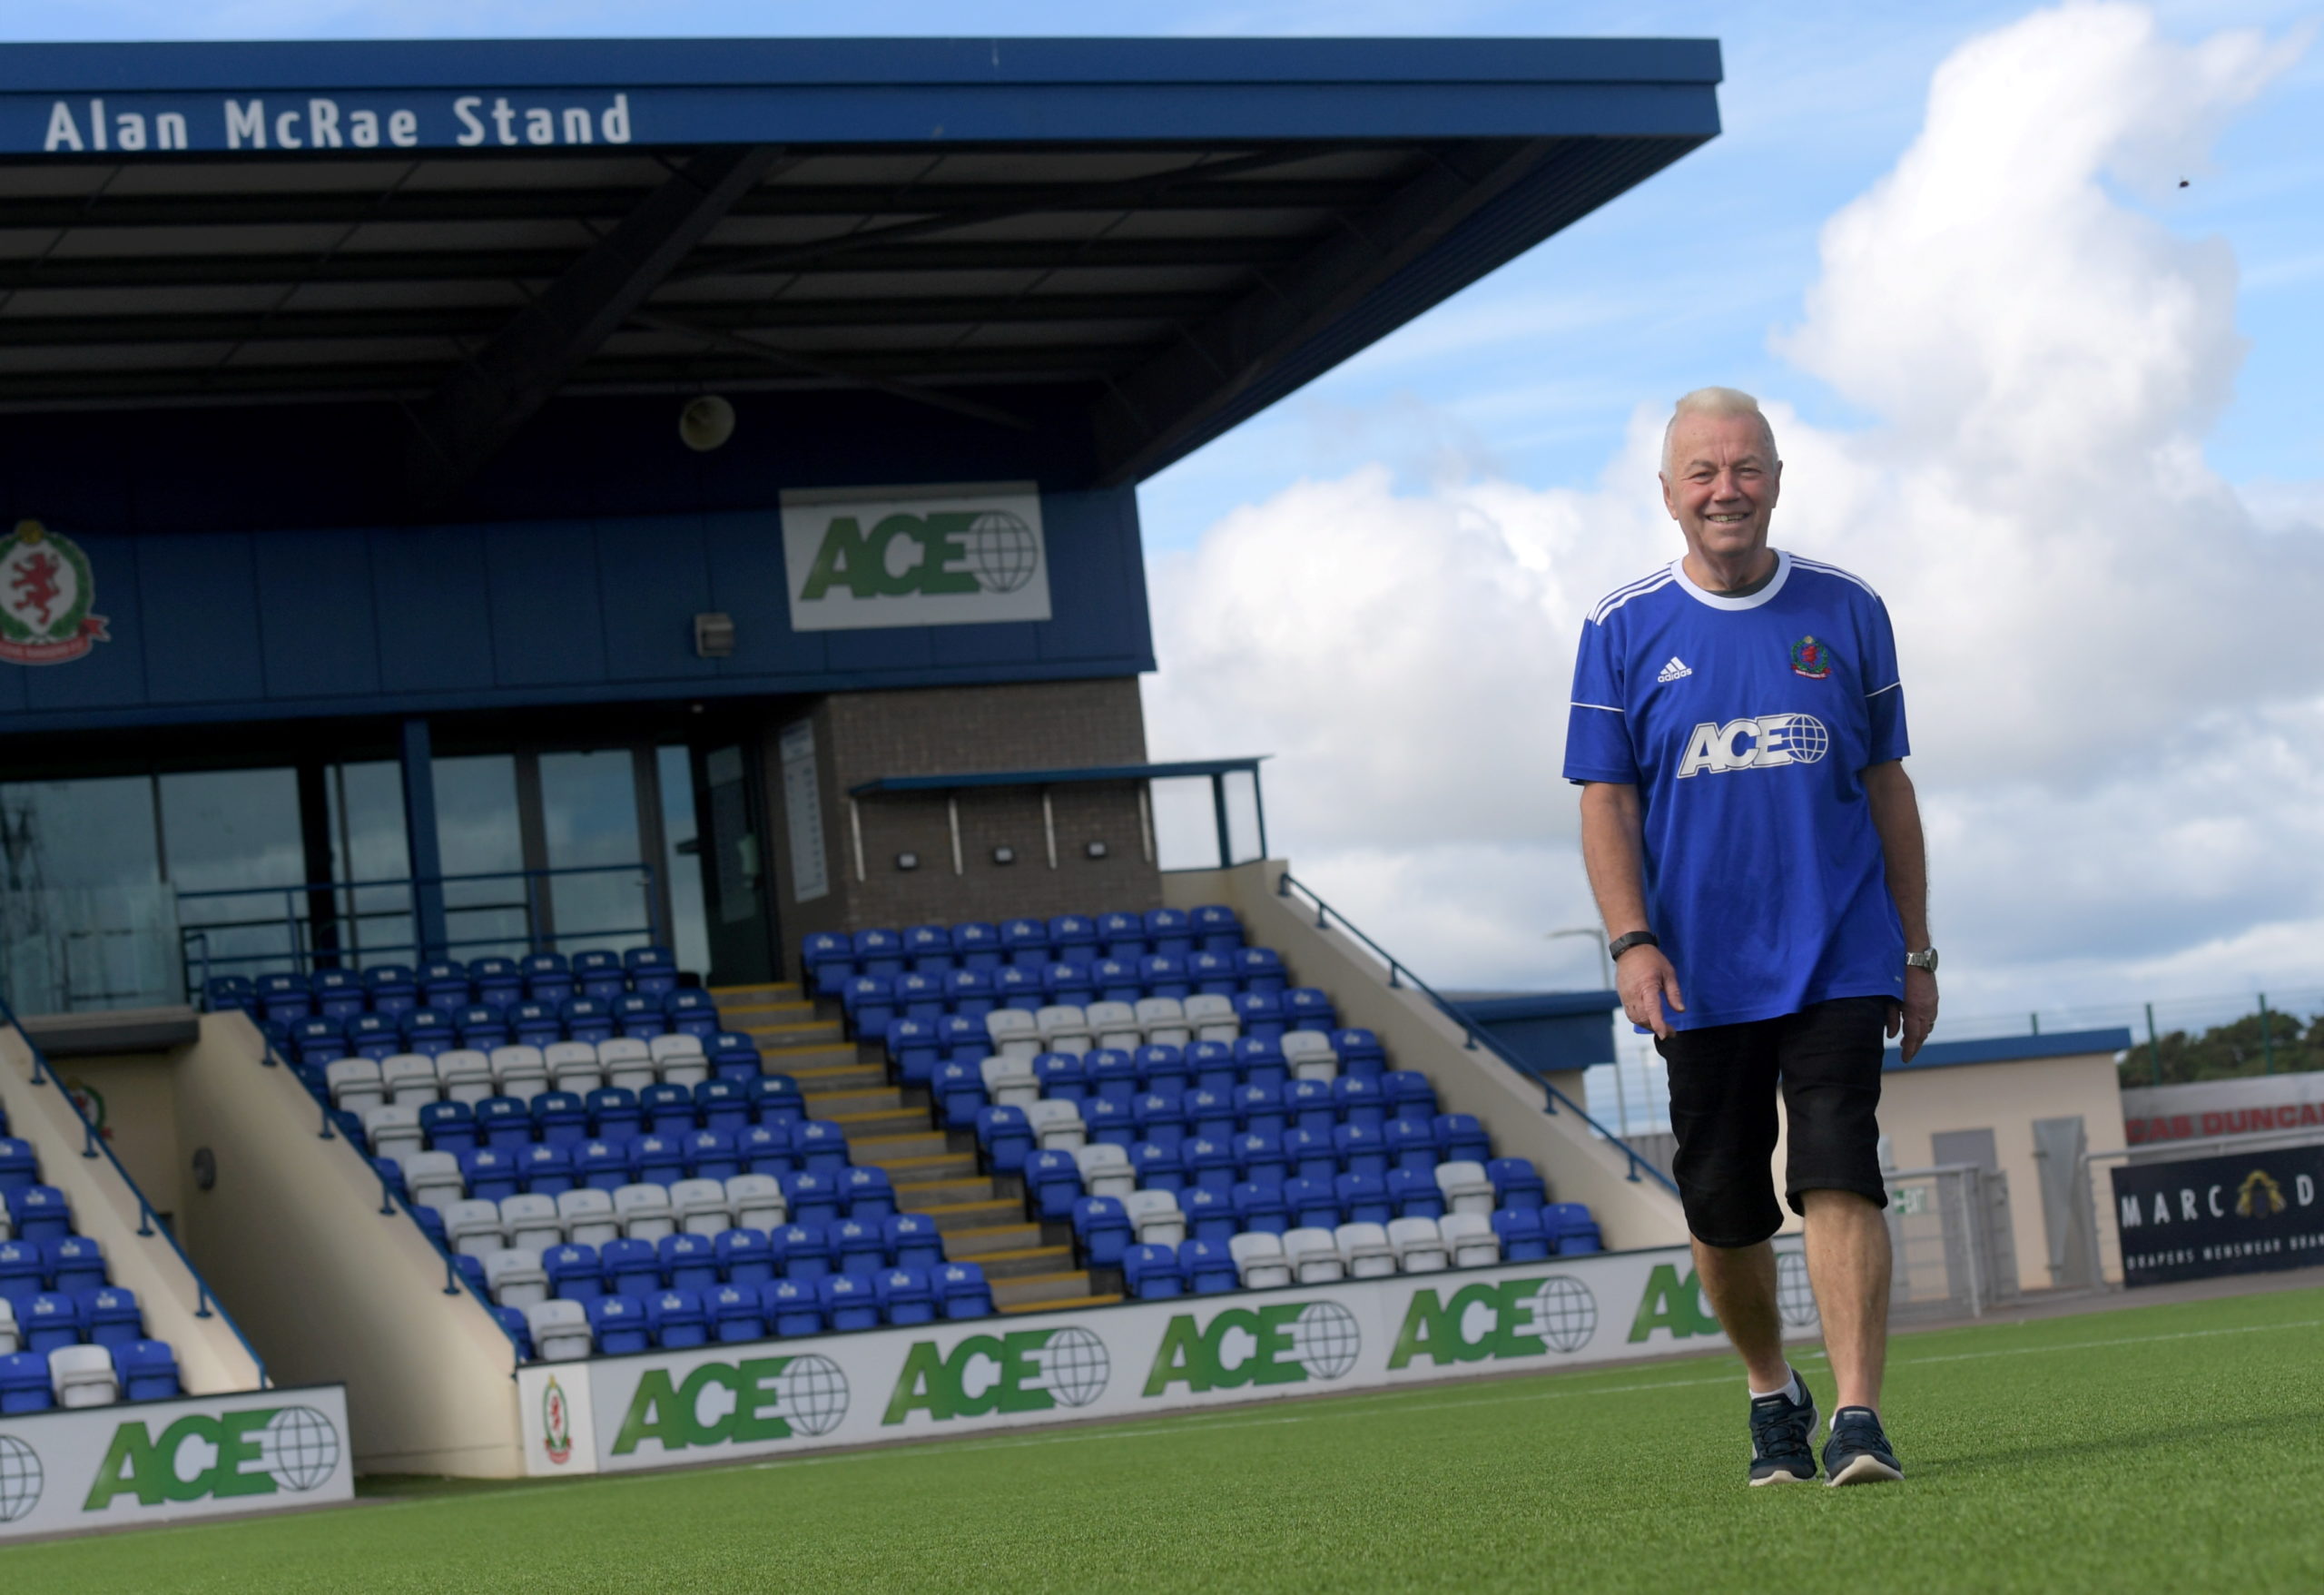 Ian Yule is going to be walking from Balmoral Stadium to Tannadice to raise money for Cove's crowdfunder to help raise cash for their legal fees as a result of Hearts/Partick Thistle's bid to deny them promotion.
Picture by Kath Flannery